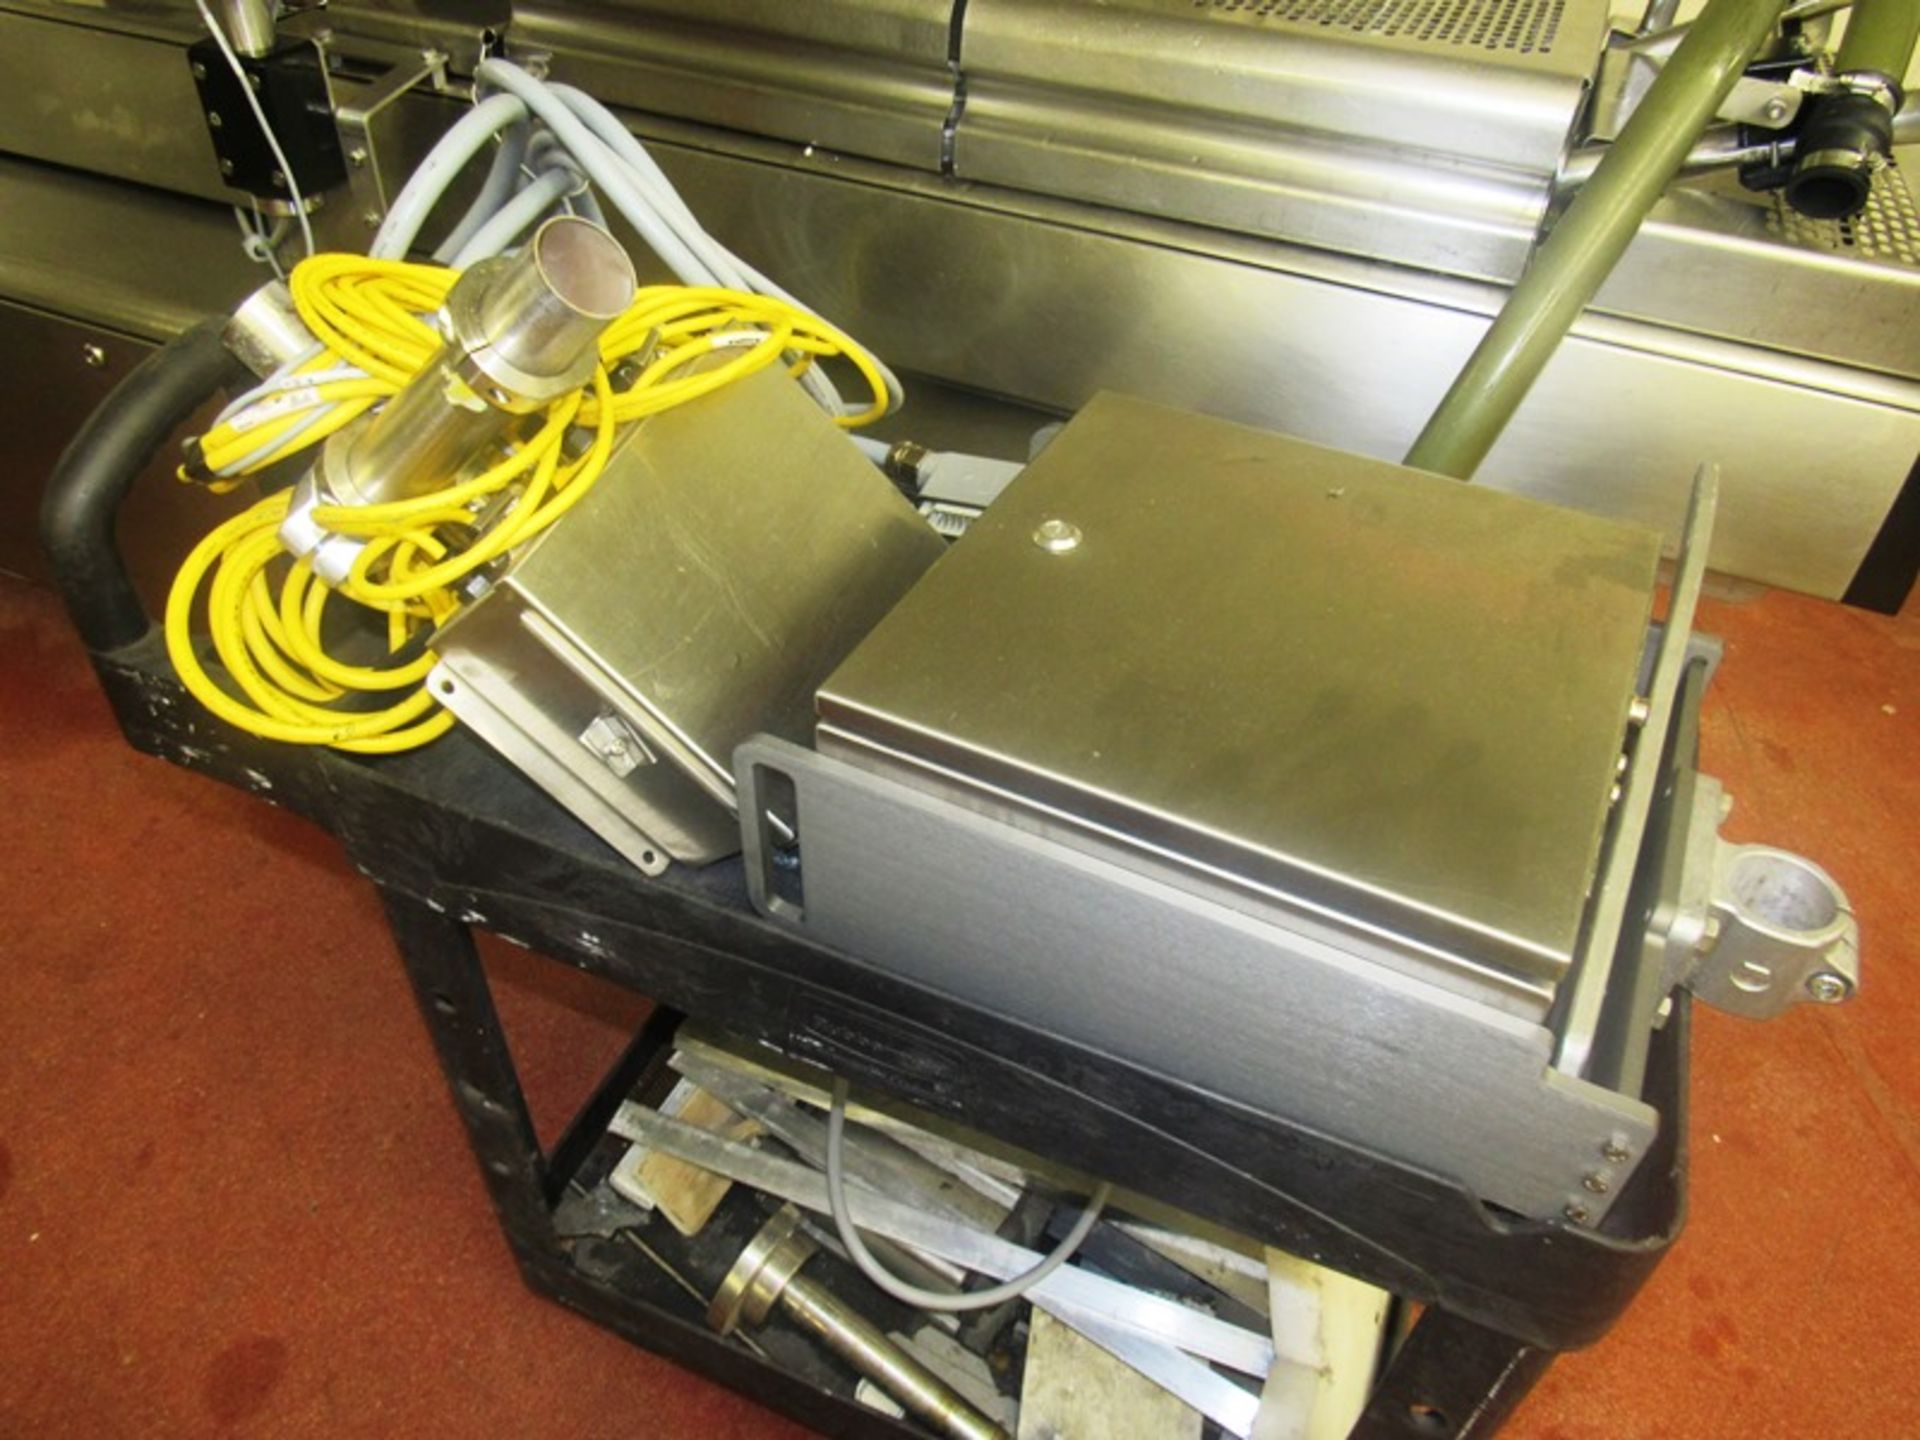 Multivac Mdl. R245 Rollstock Thermoformer, Ser. #130639, Mfg. 2009, 220 volts, 420 mm between chains - Image 28 of 28